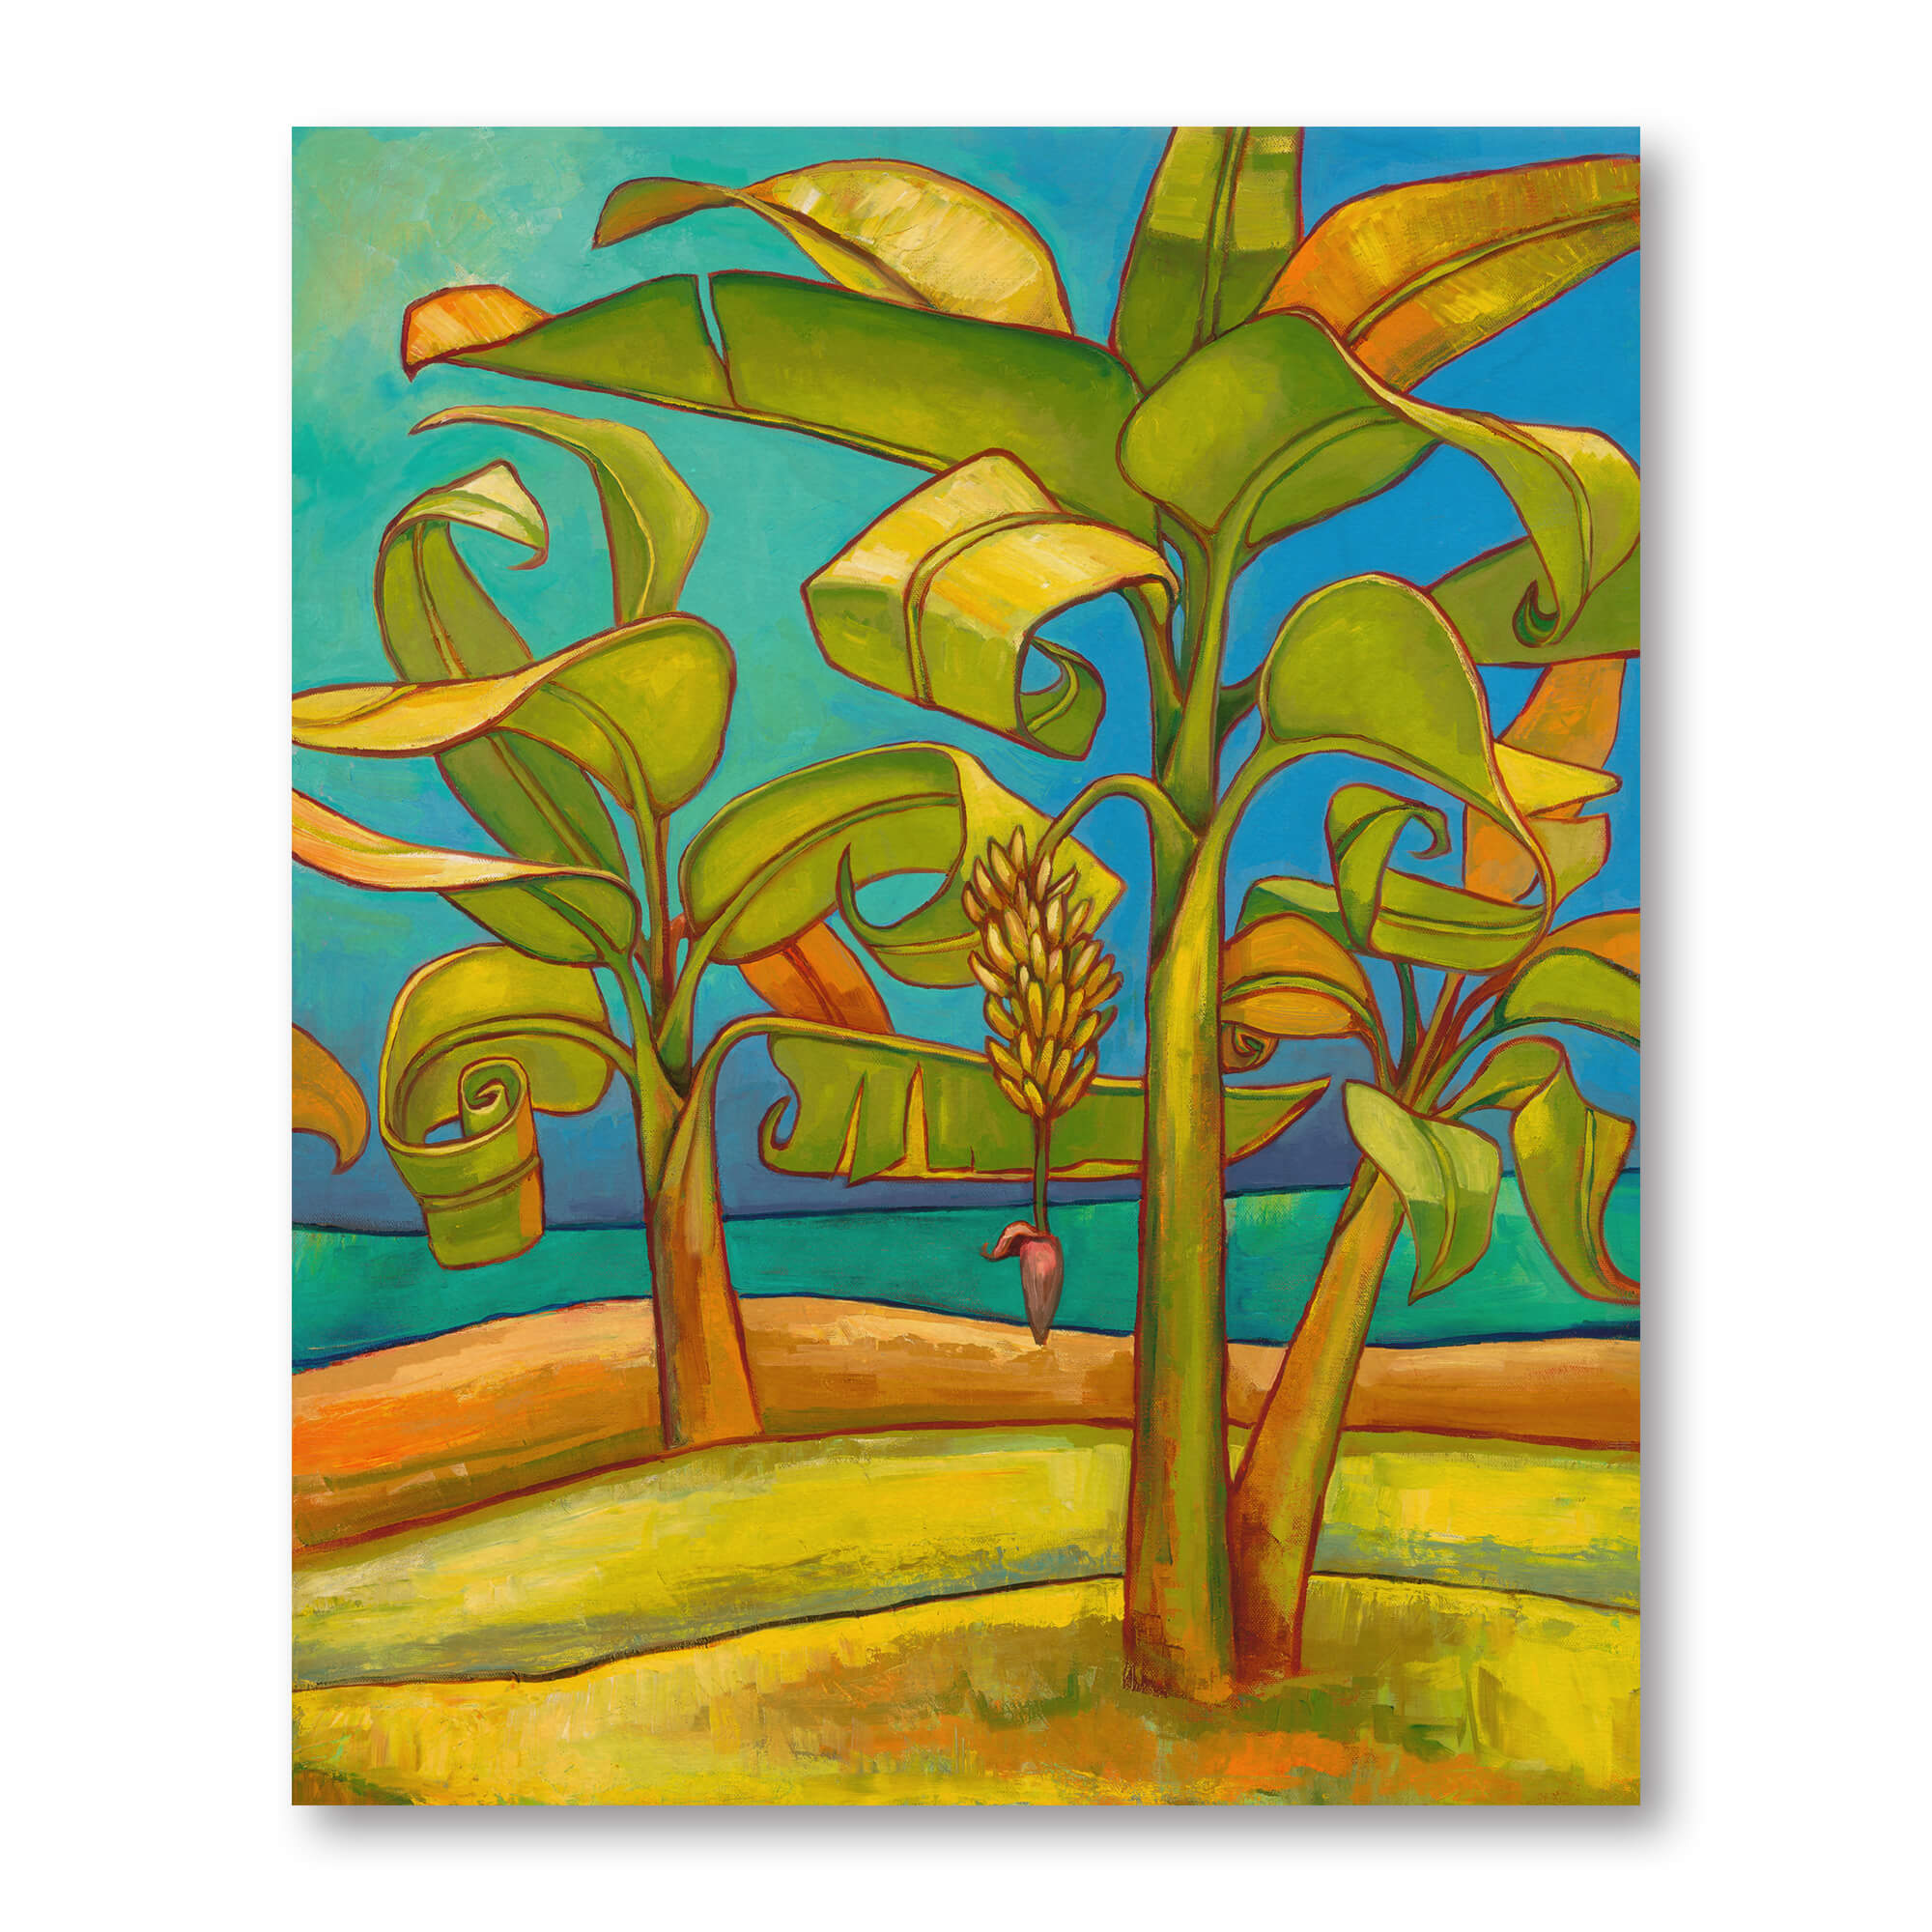 a whimsical depiction of banana trees by Hawaii artist Colin Redican